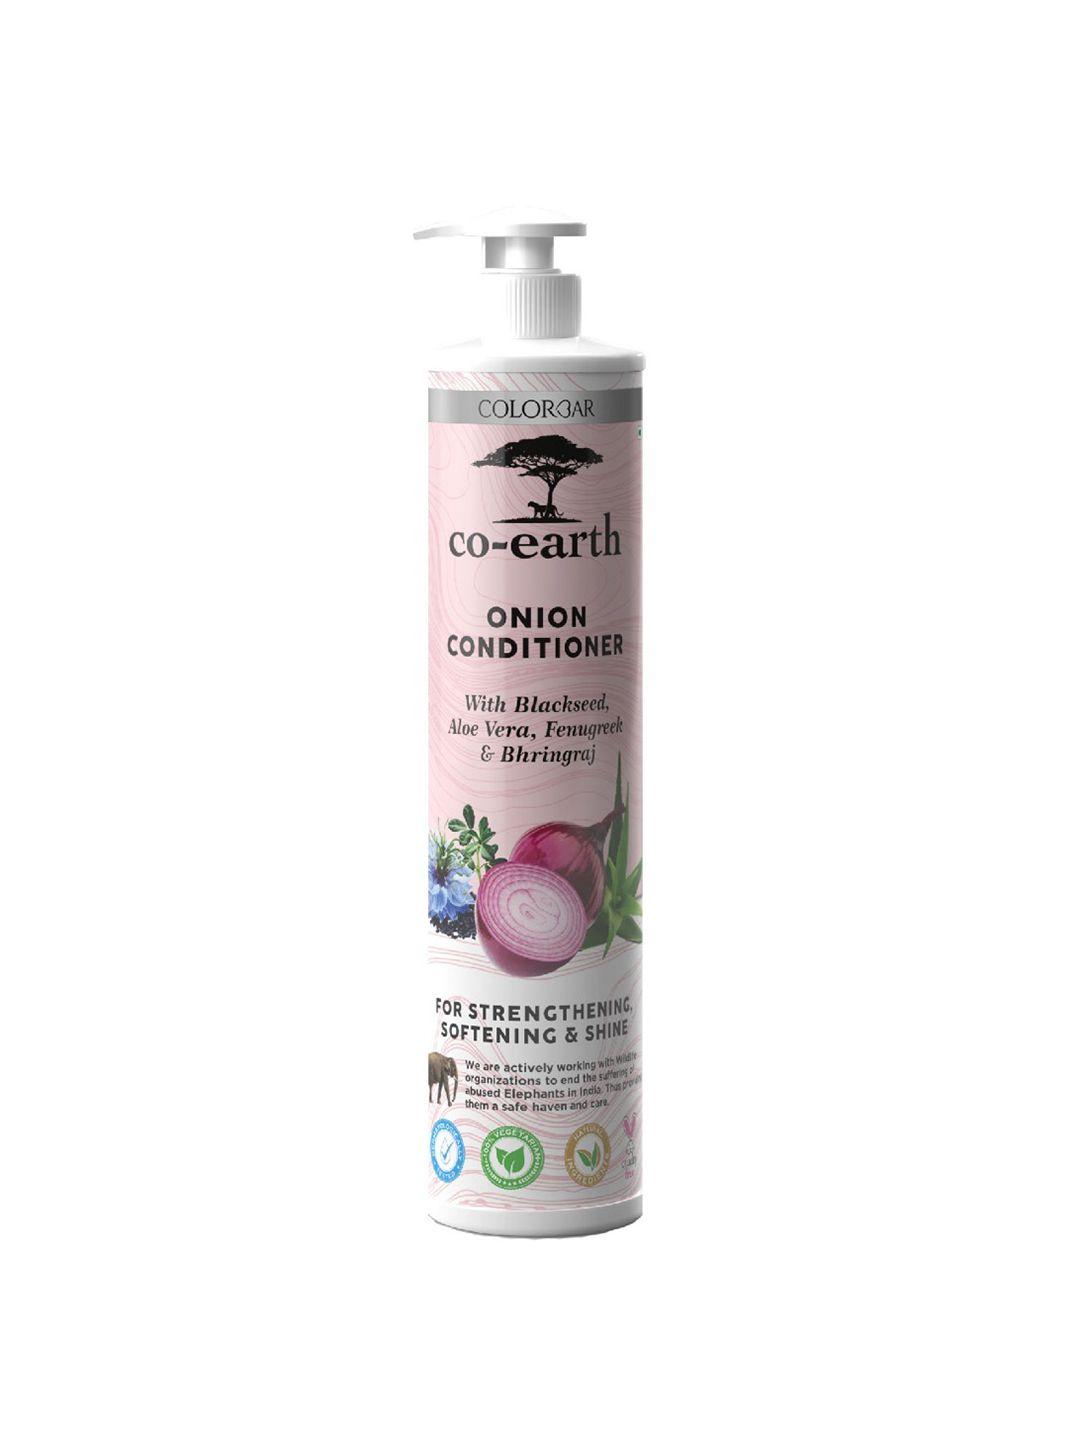 colorbar co-earth onion conditioner with blackseed & aloe vera for strengthening - 300ml